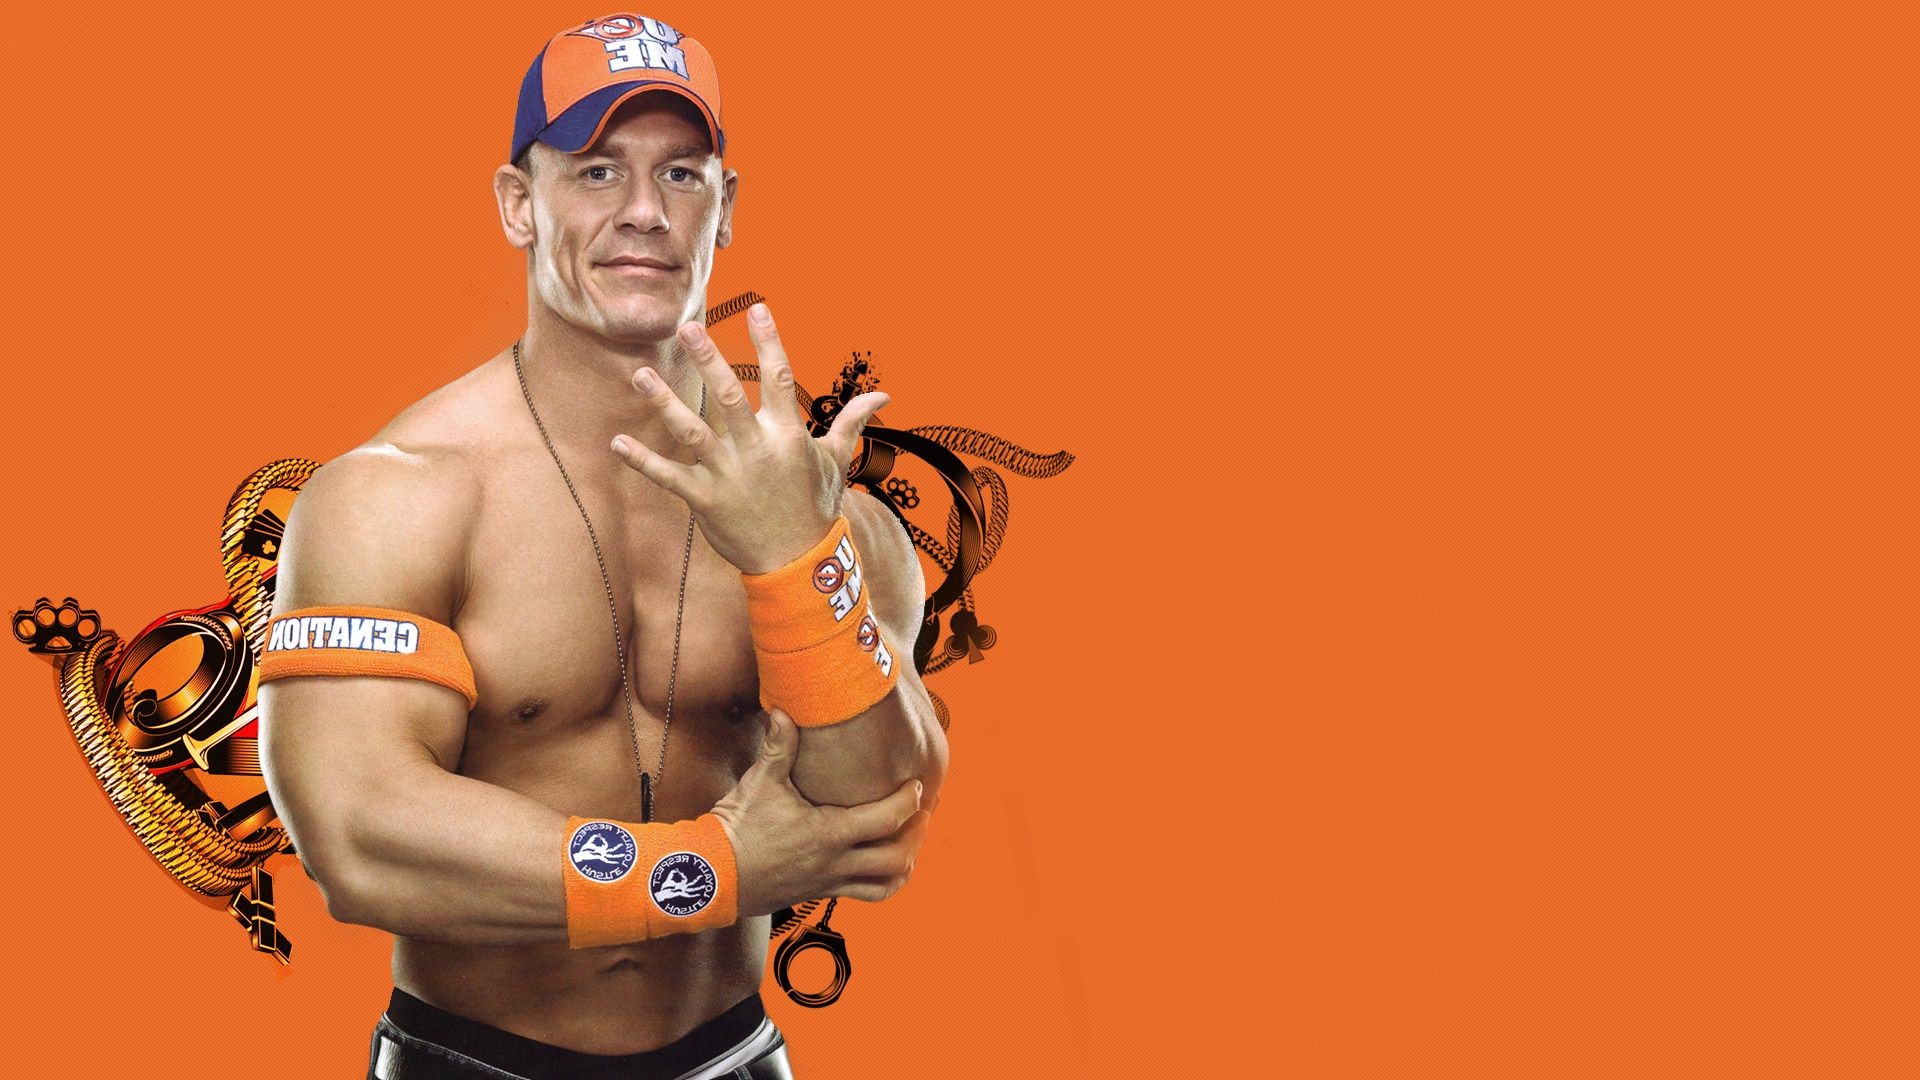 1920x1080 John Cena HD Wallpaper And Images 2015 (4) - Hd Wallpapers Free 2015